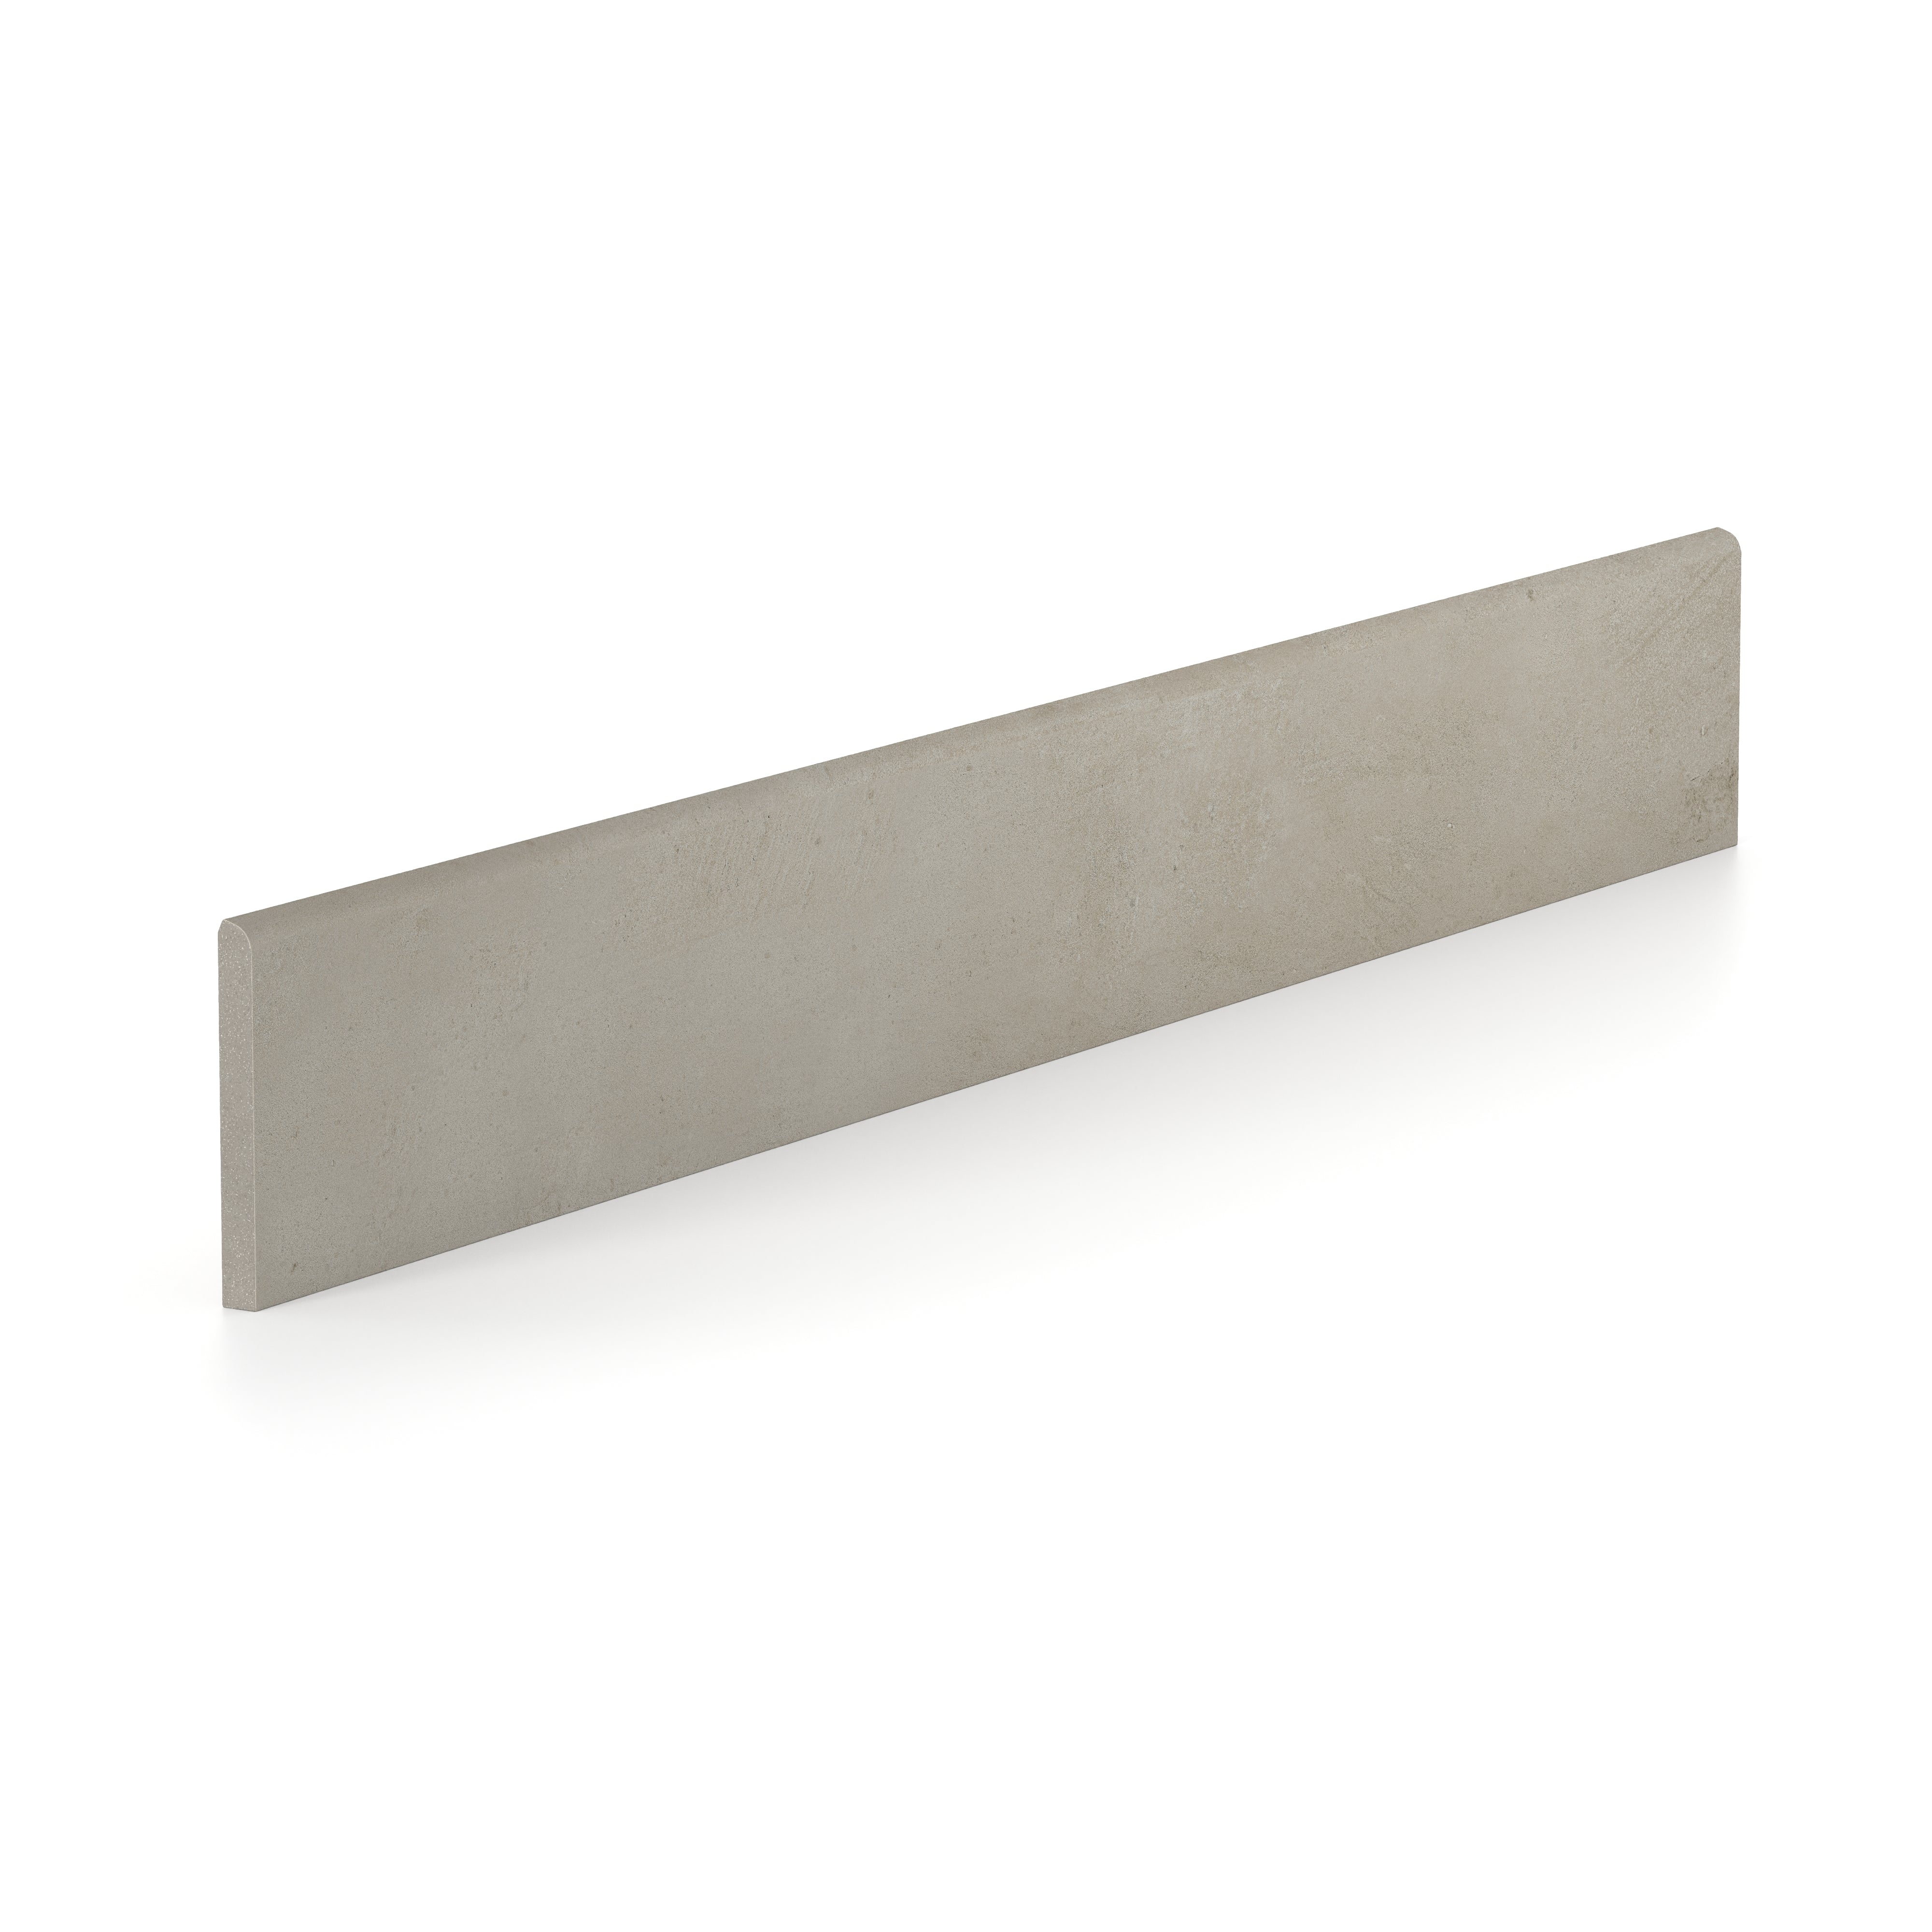 Ramsey 3x24 Matte Porcelain Bullnose Tile in Putty